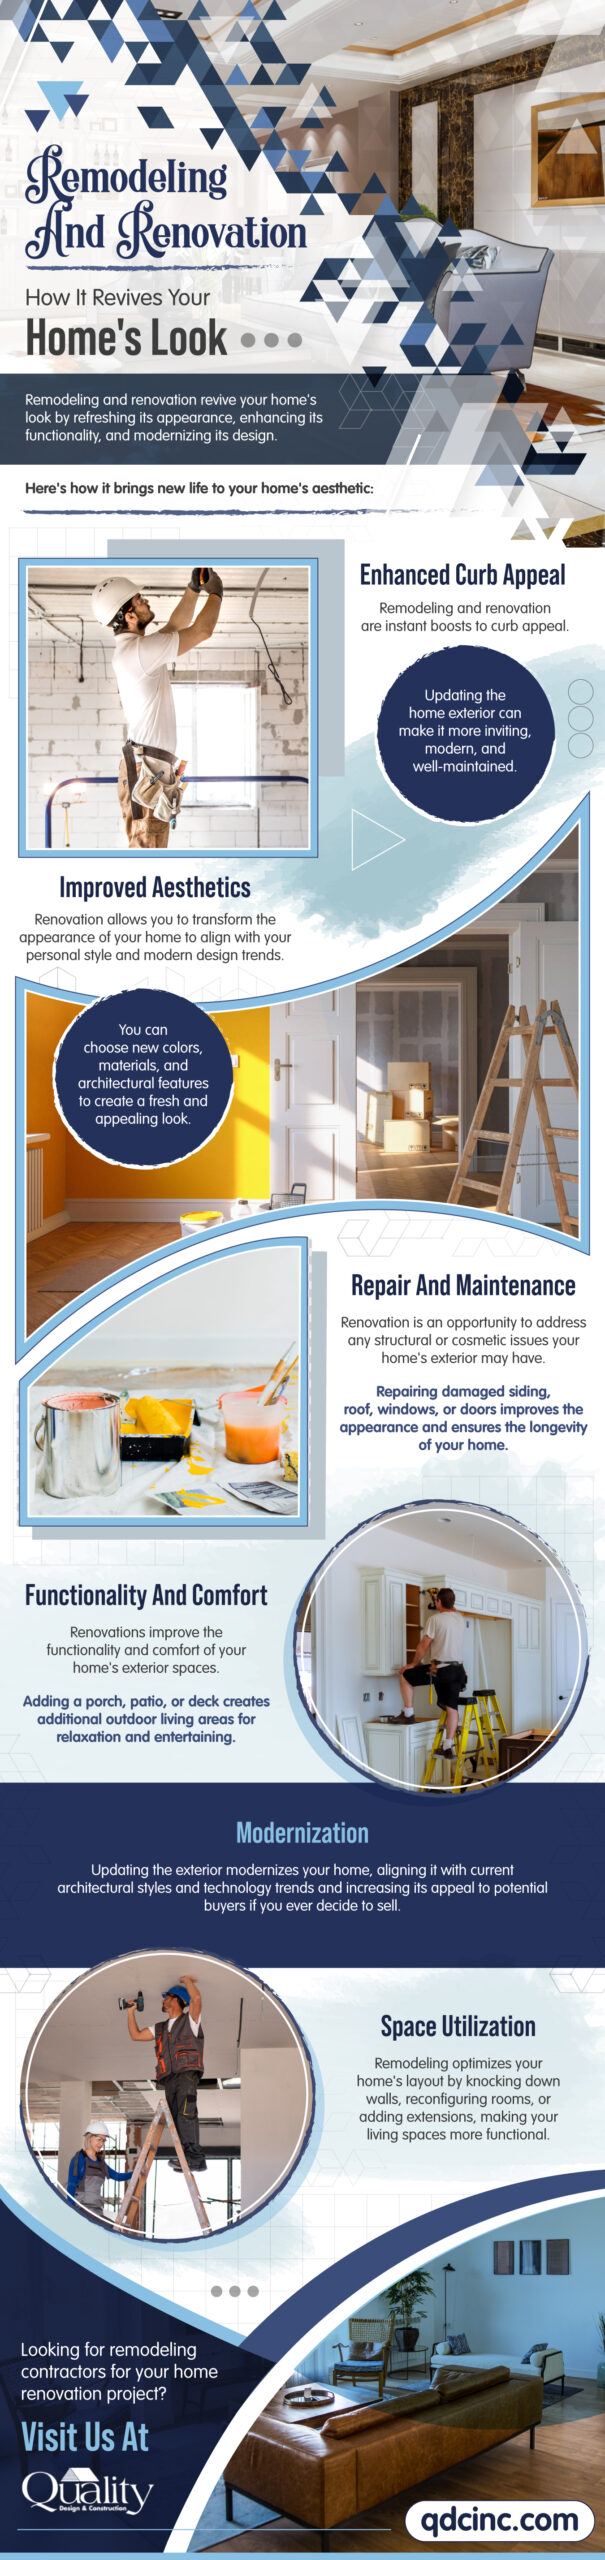 Remodeling and Renovation- How It Revives Your Home's Look